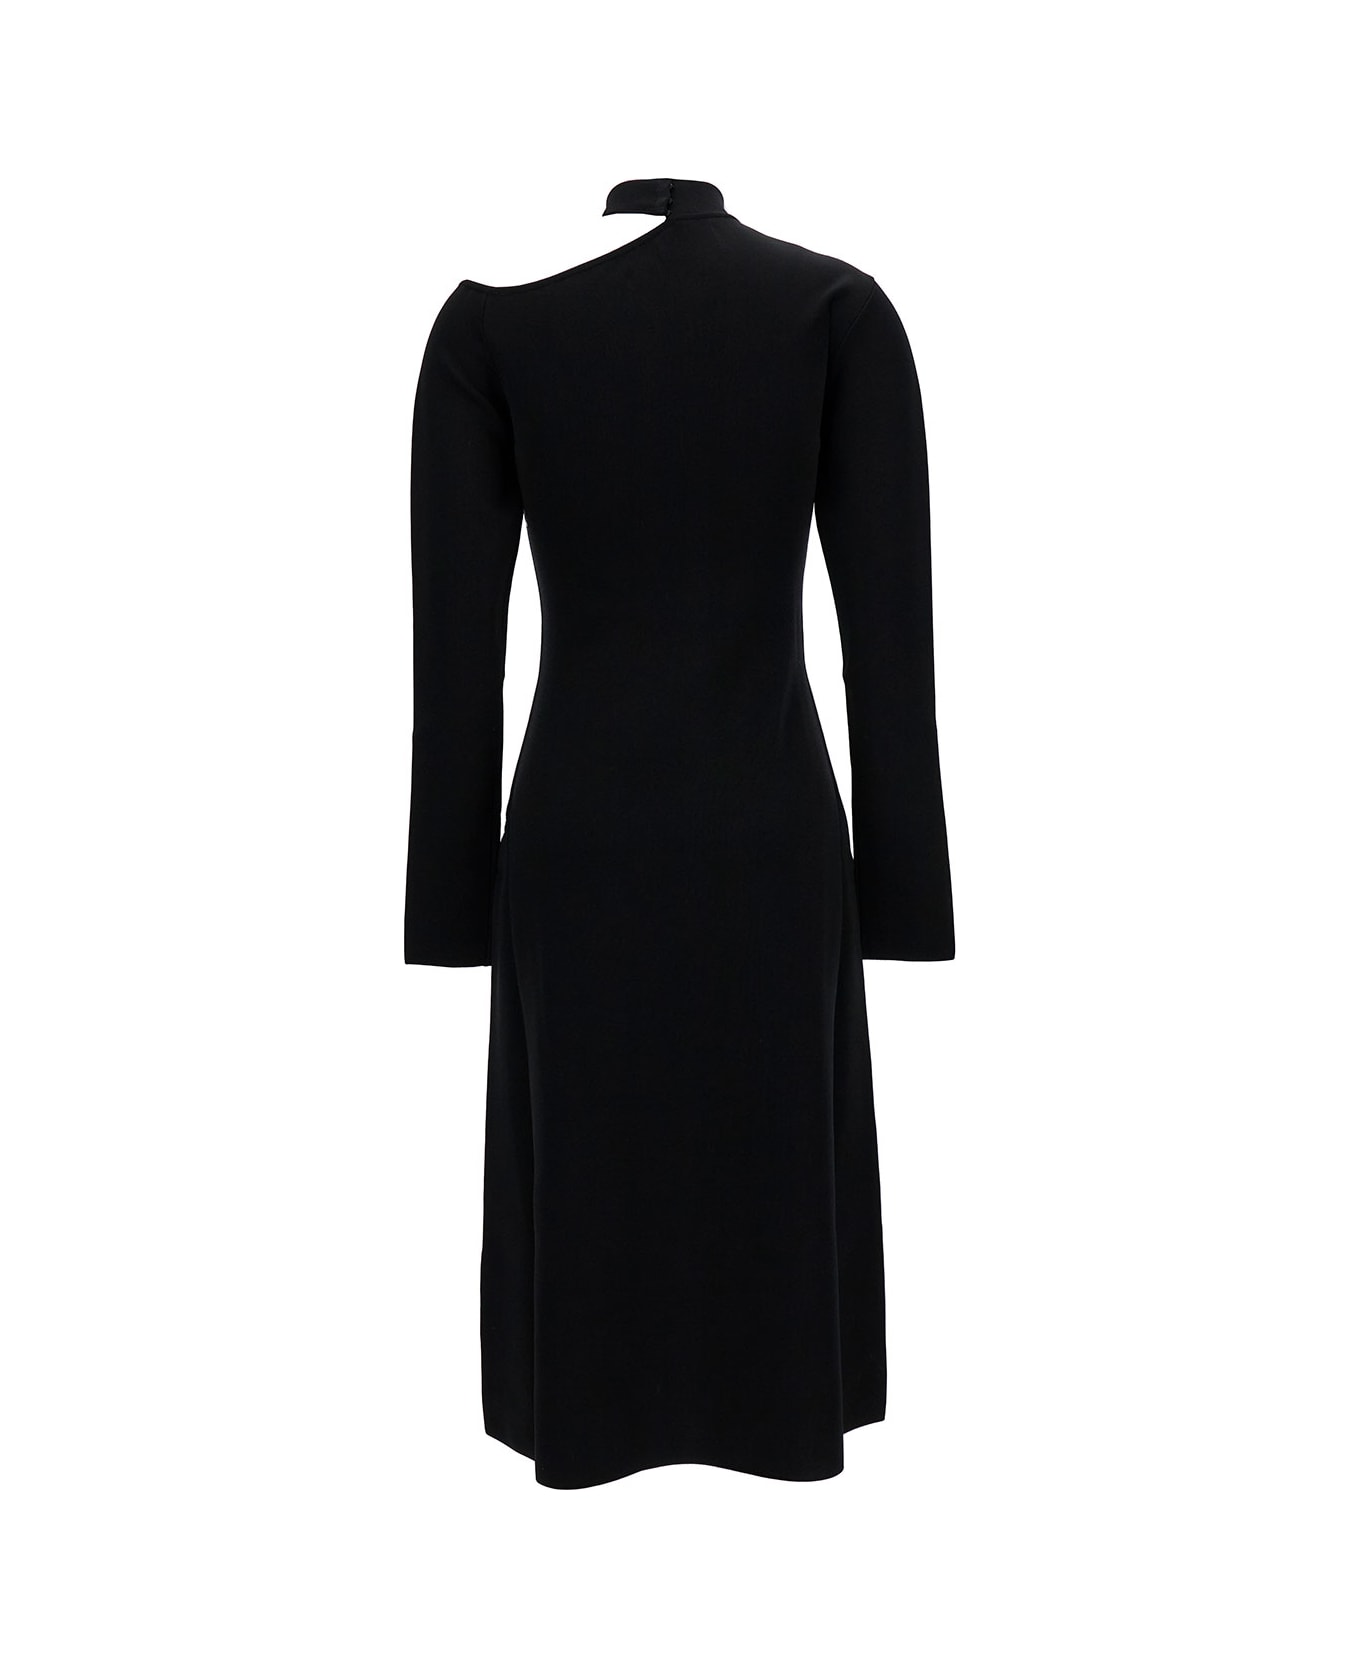 Ferragamo Midi Black Dress With Cut-out And Long Sleeve In Viscose Blend Woman - Black